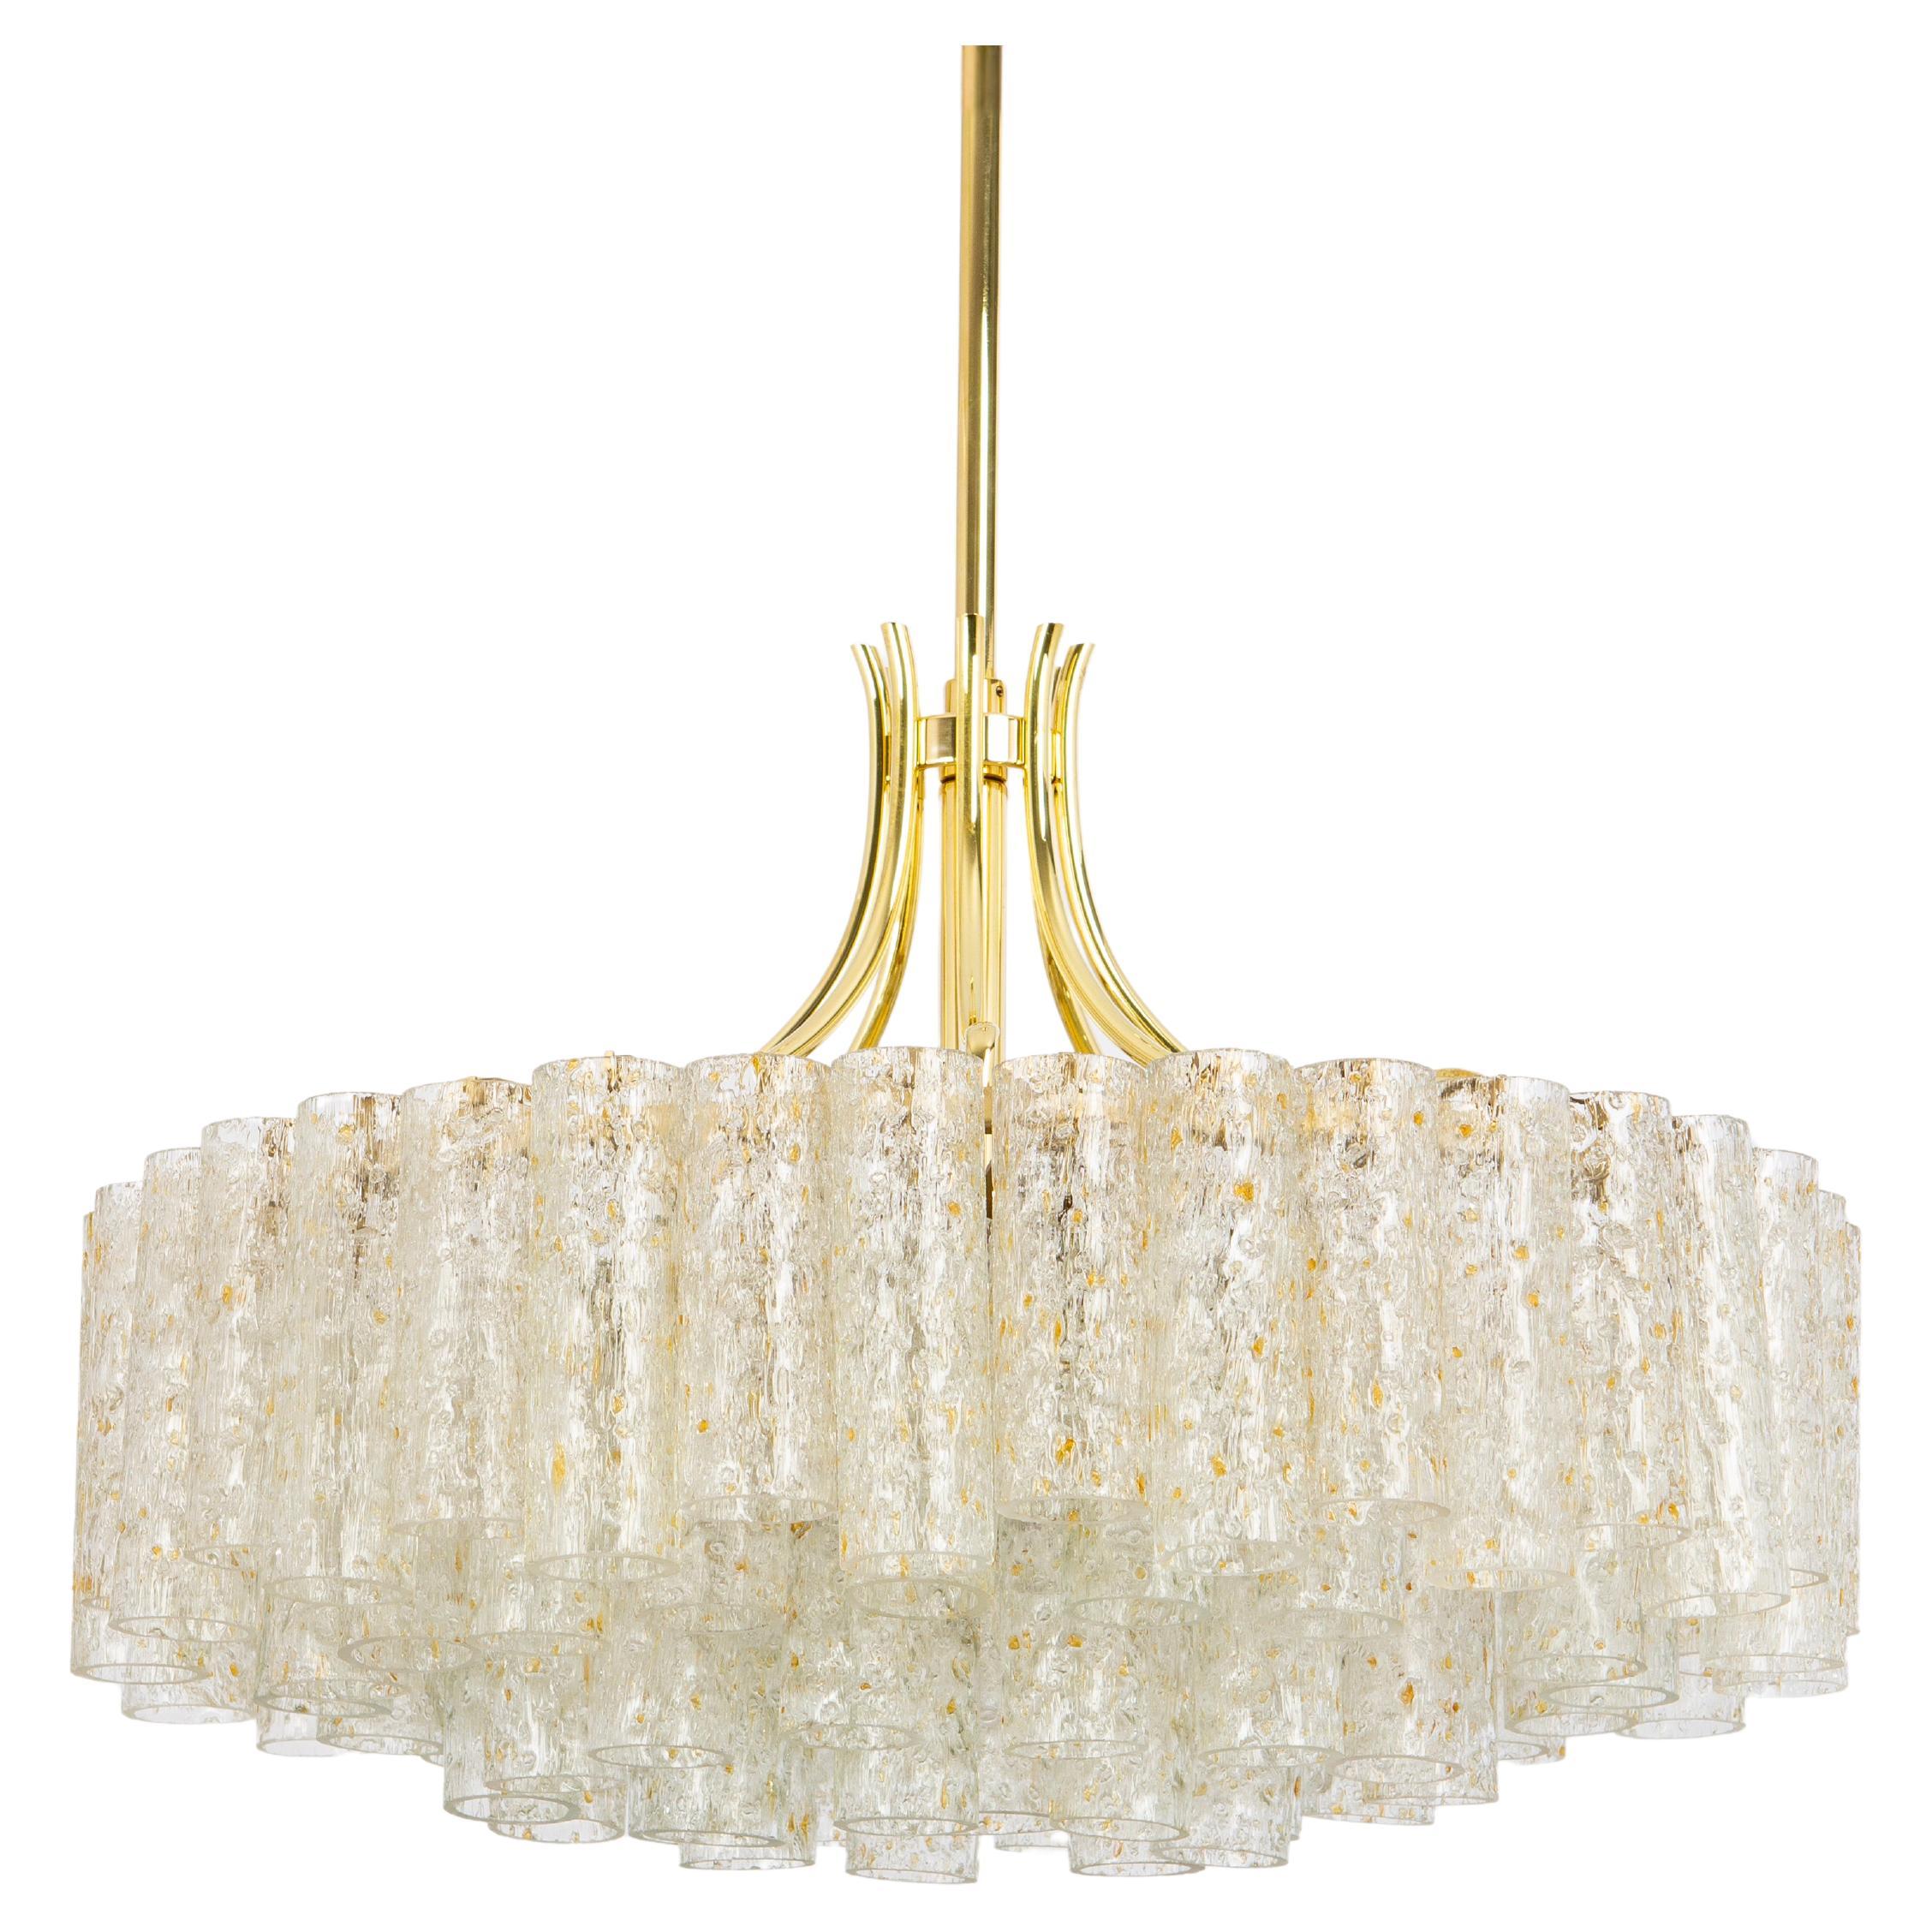 1 of 2 Stunning Large Doria Ice Glass Tubes Chandelier, Germany, 1960s